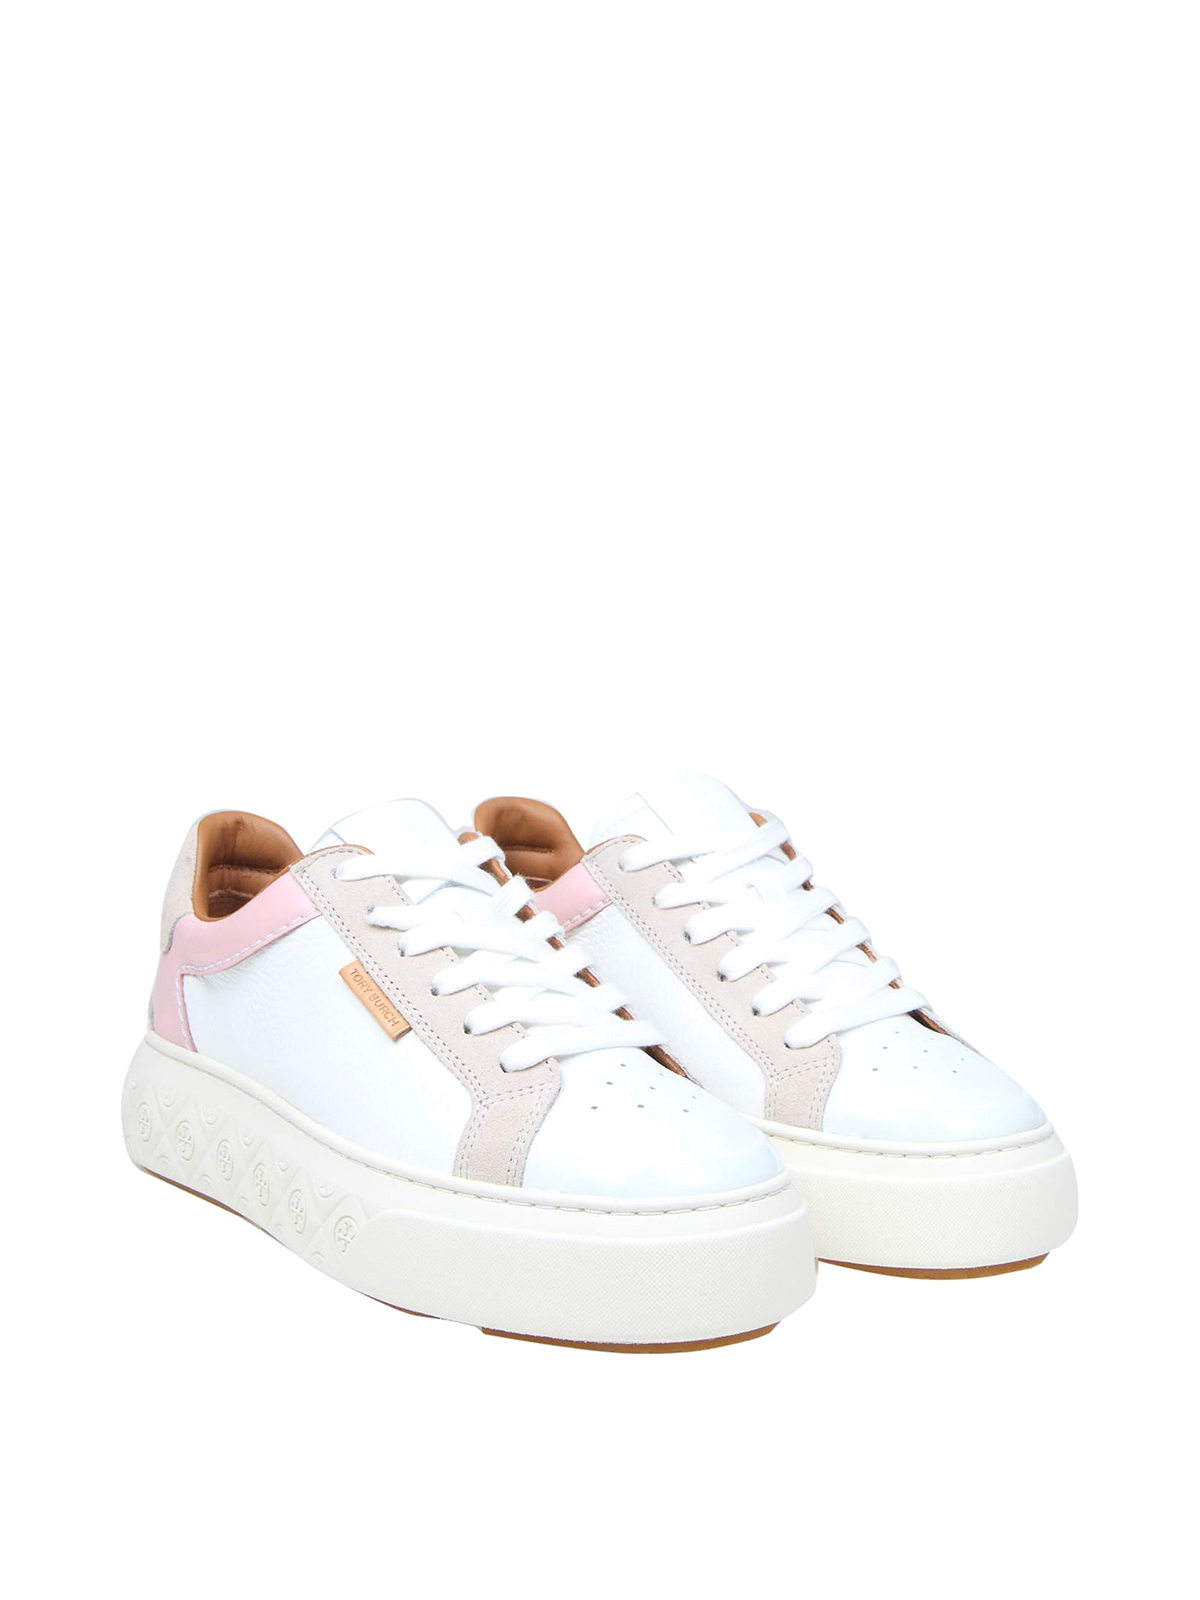 Trainers Tory Burch - Ladybug sneaker in white and pink leather - 143066650